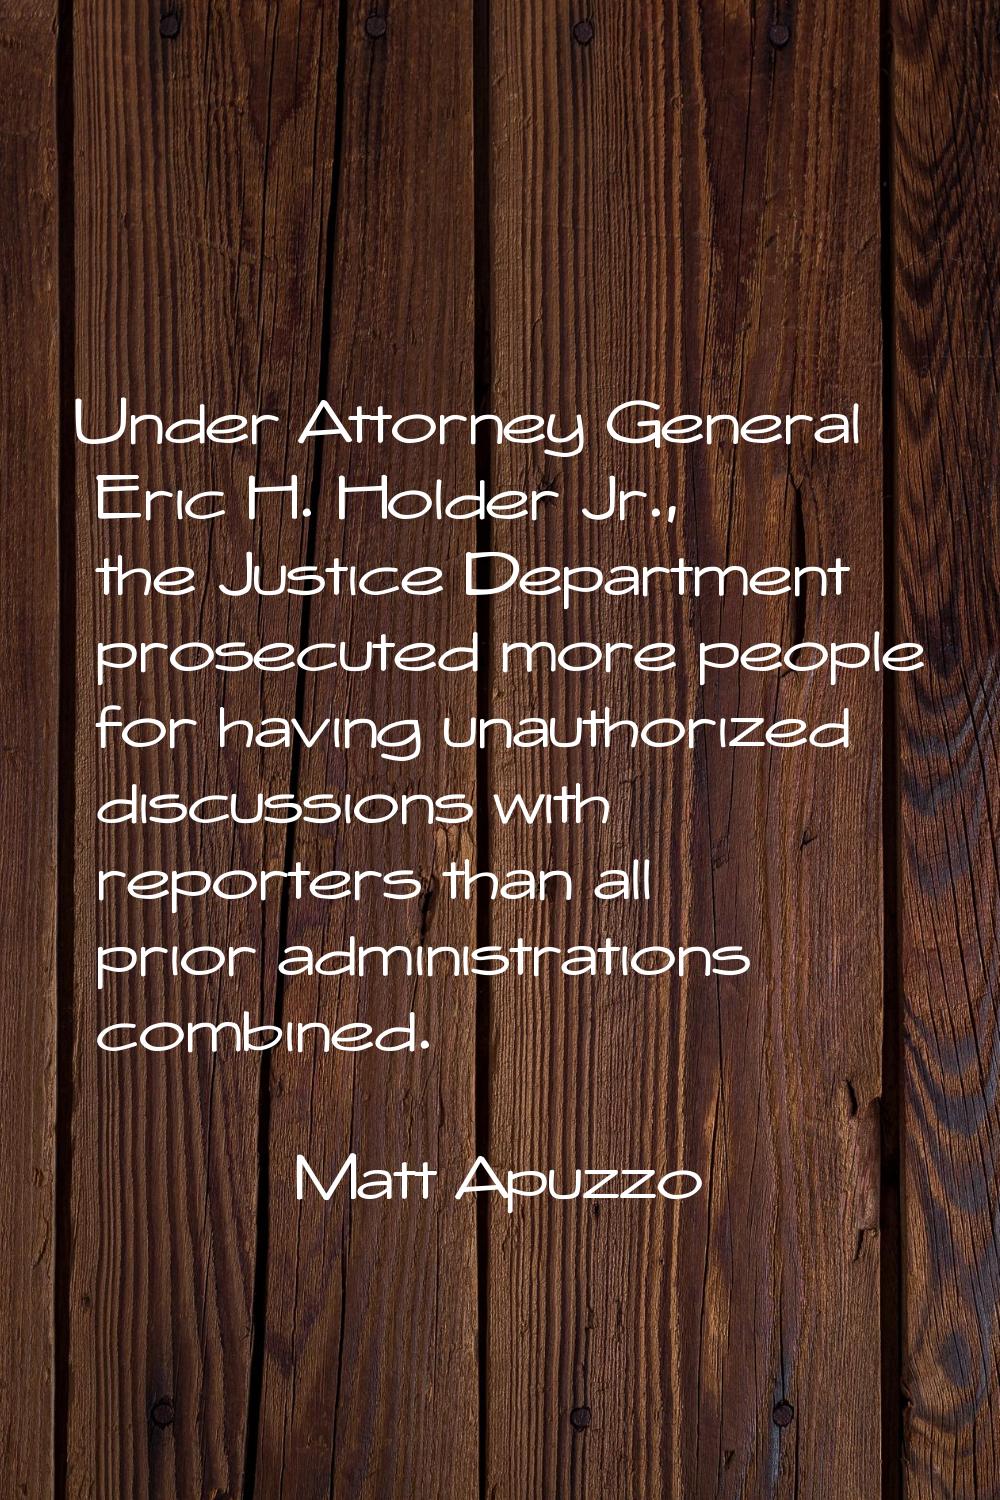 Under Attorney General Eric H. Holder Jr., the Justice Department prosecuted more people for having